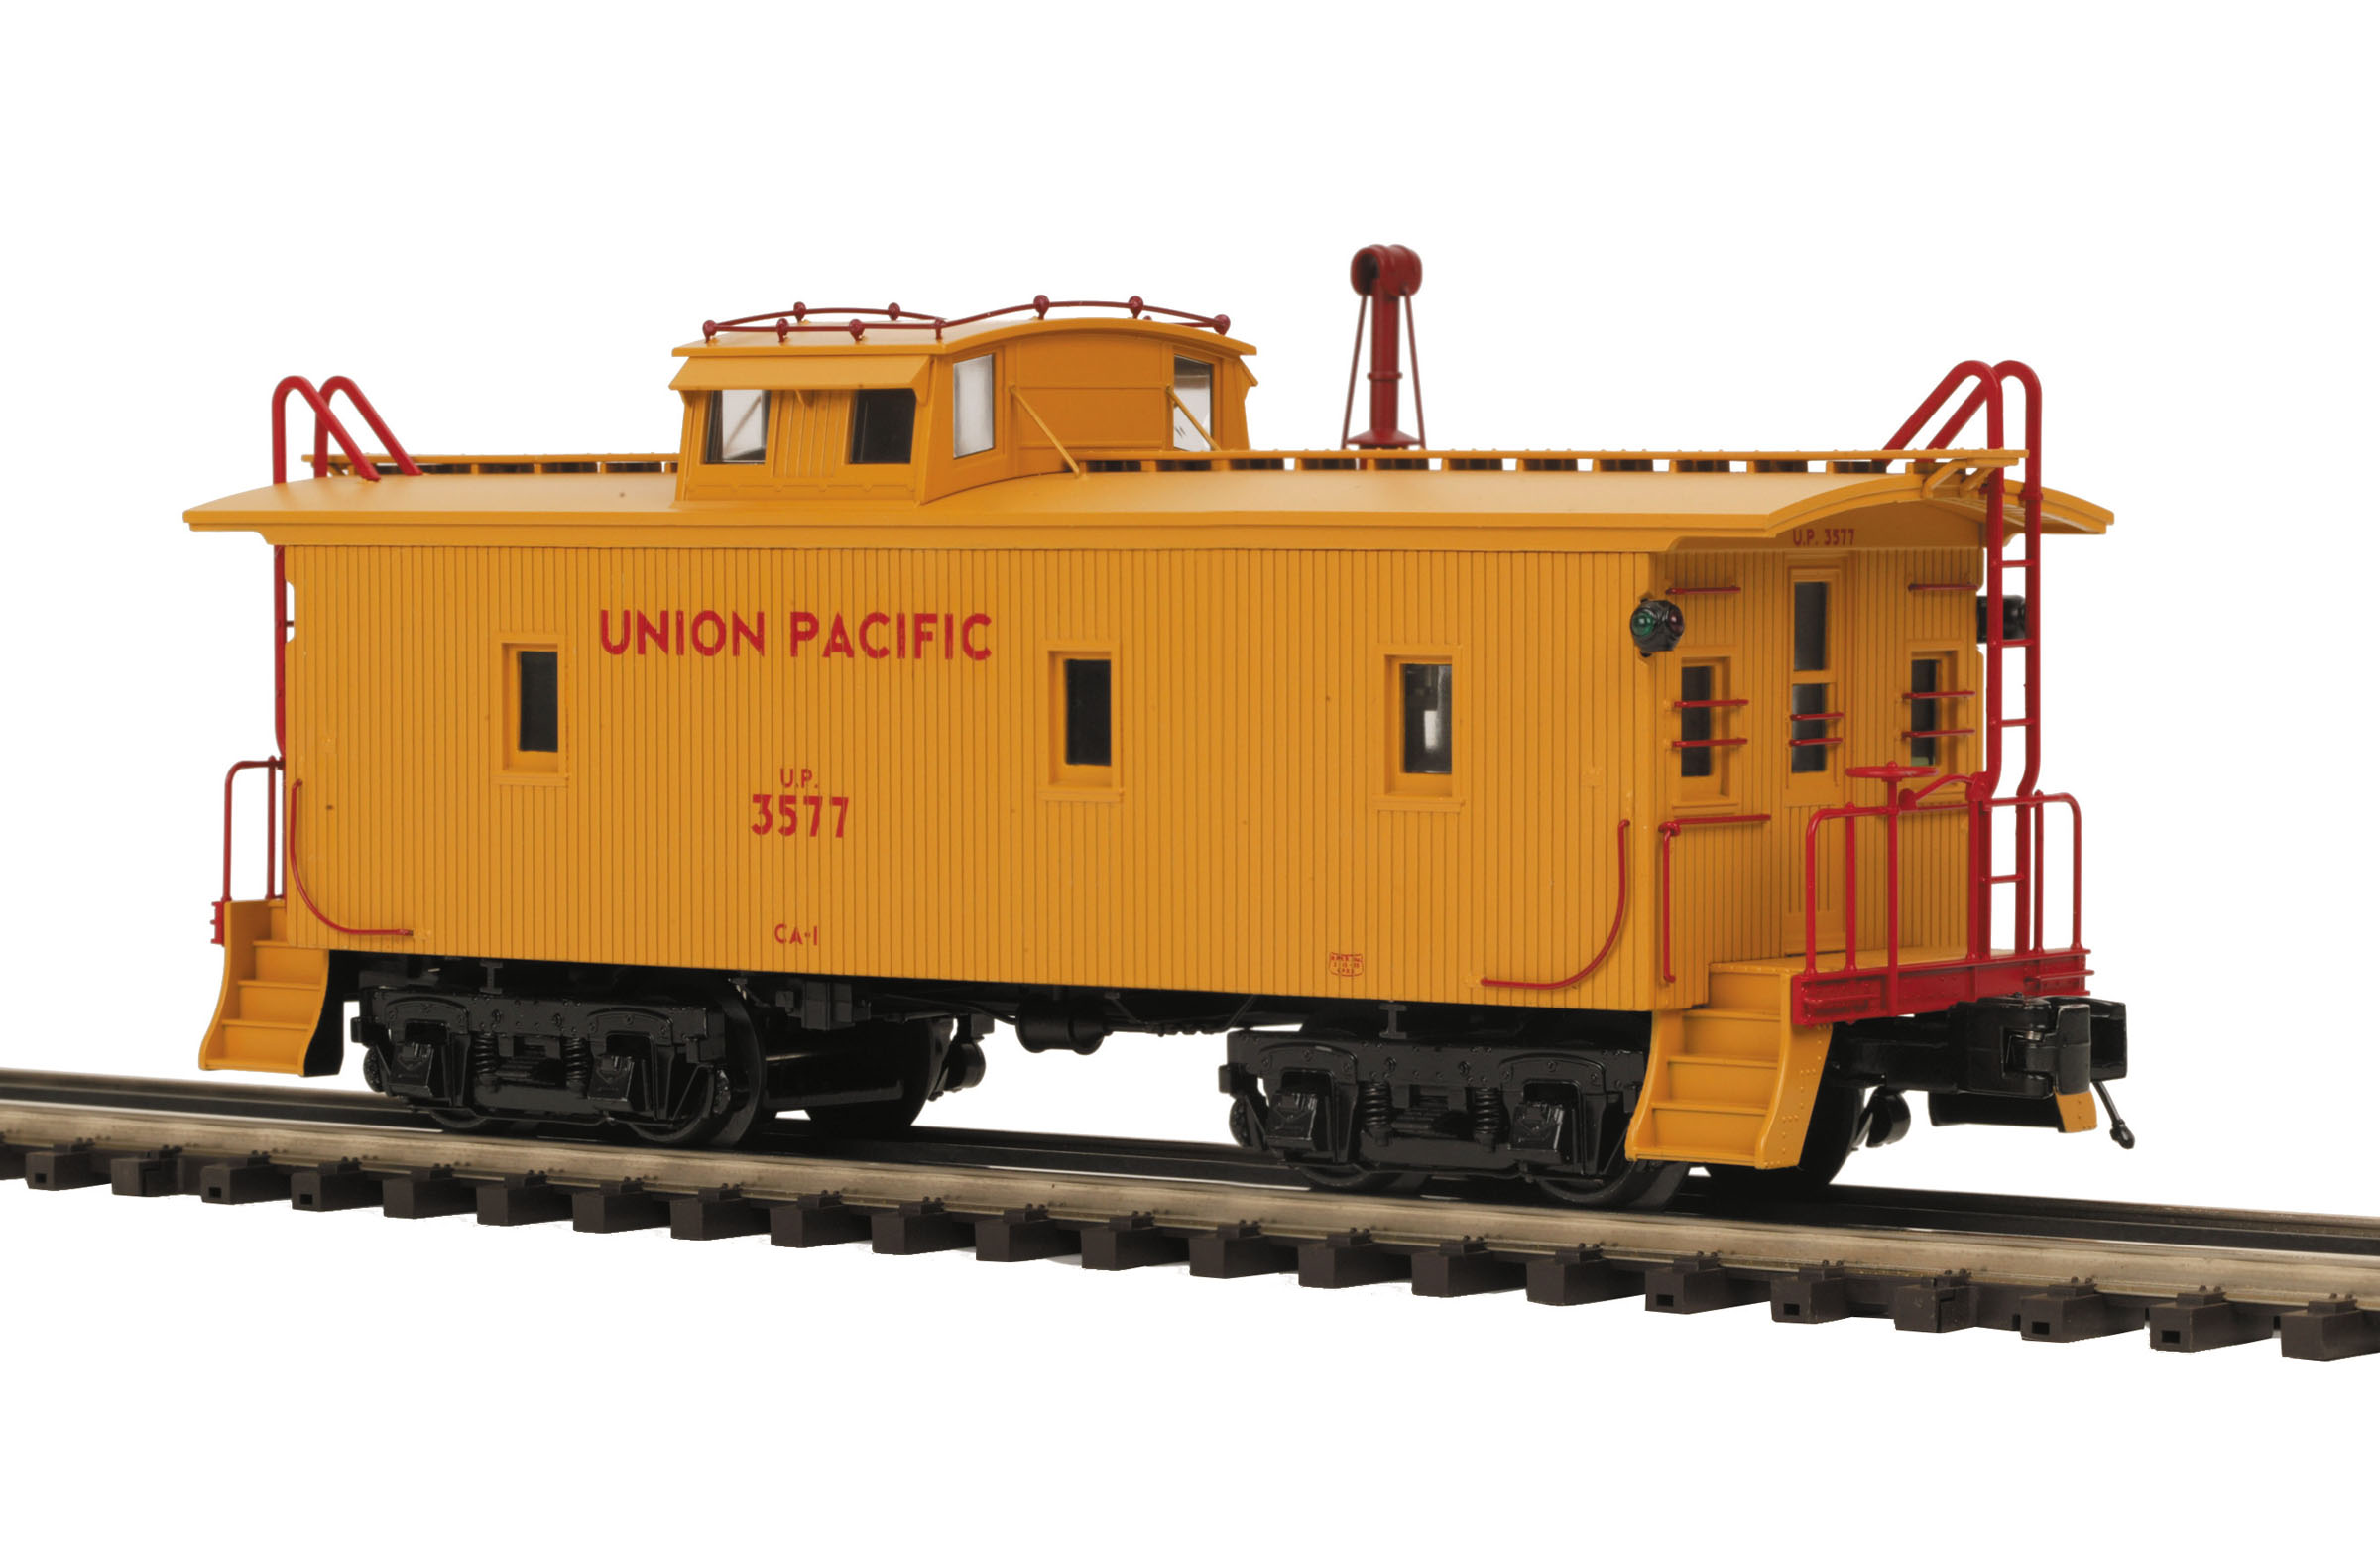 The MTH 20-91255 was featured in the 2008 Volume 1 catalog. The two 